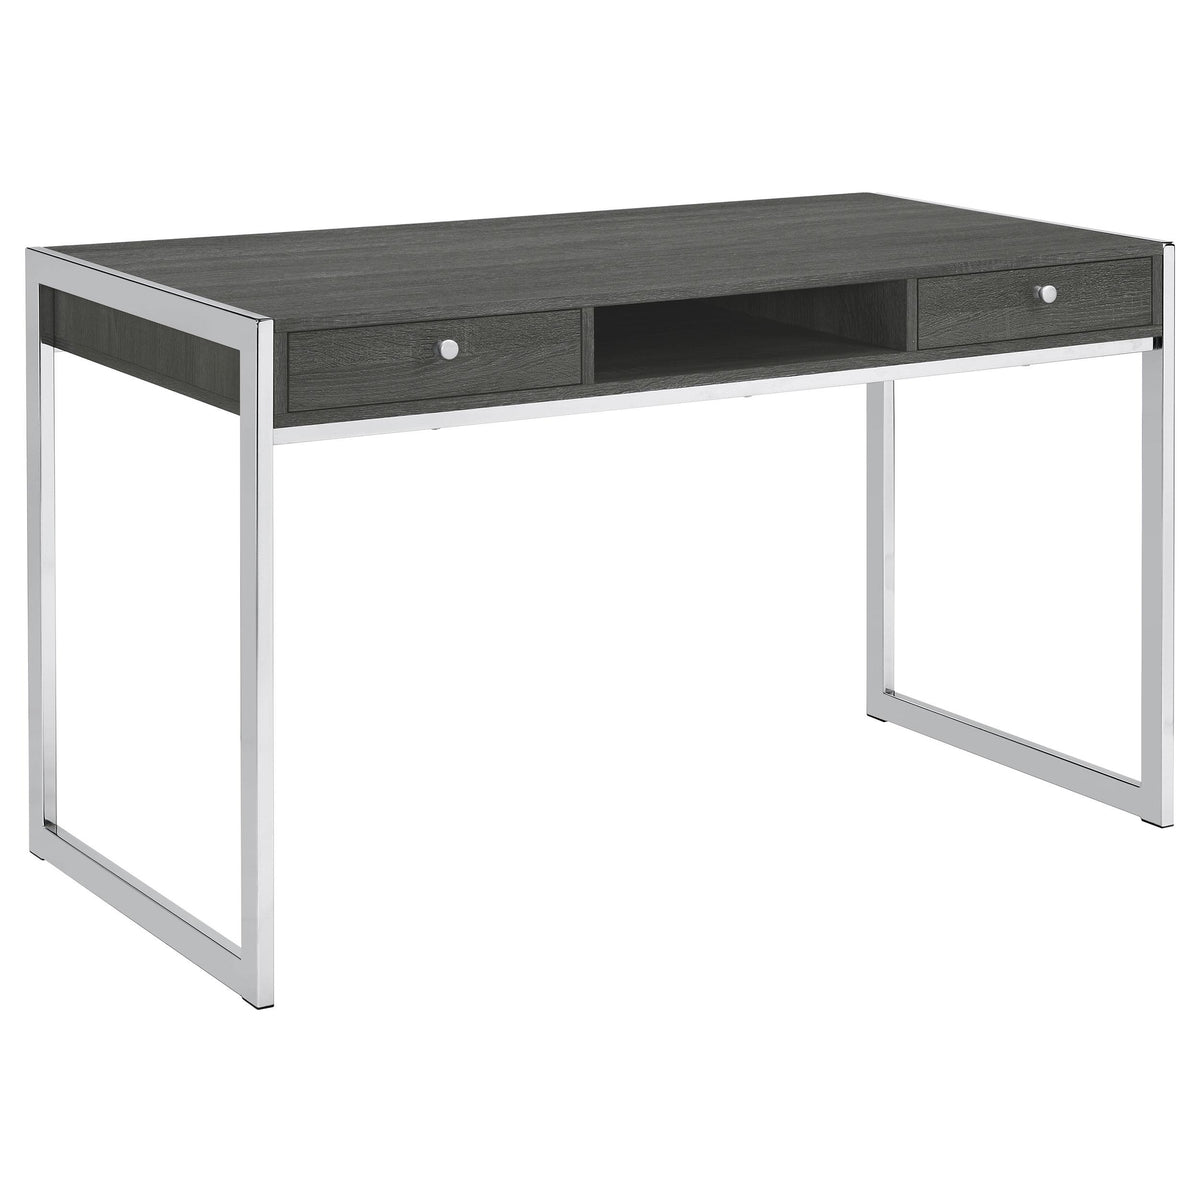 Wallice 2-drawer Writing Desk Weathered Grey and Chrome Wallice 2-drawer Writing Desk Weathered Grey and Chrome Half Price Furniture